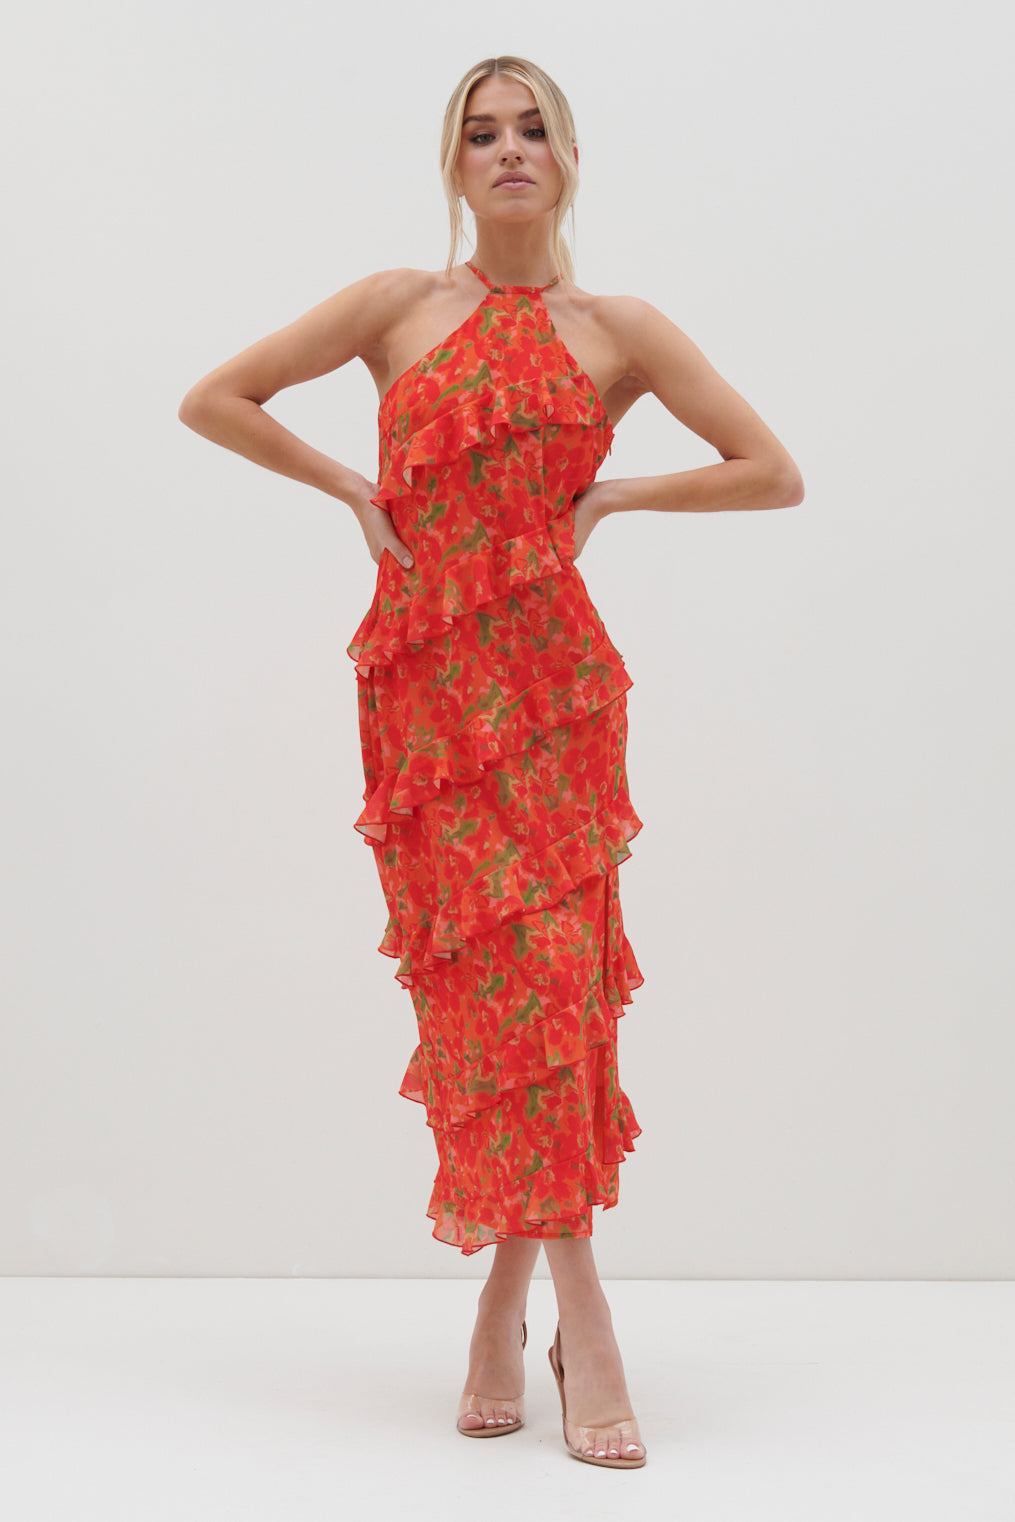 Katy Ruffle Midaxi Dress - Red and Orange Floral, 8